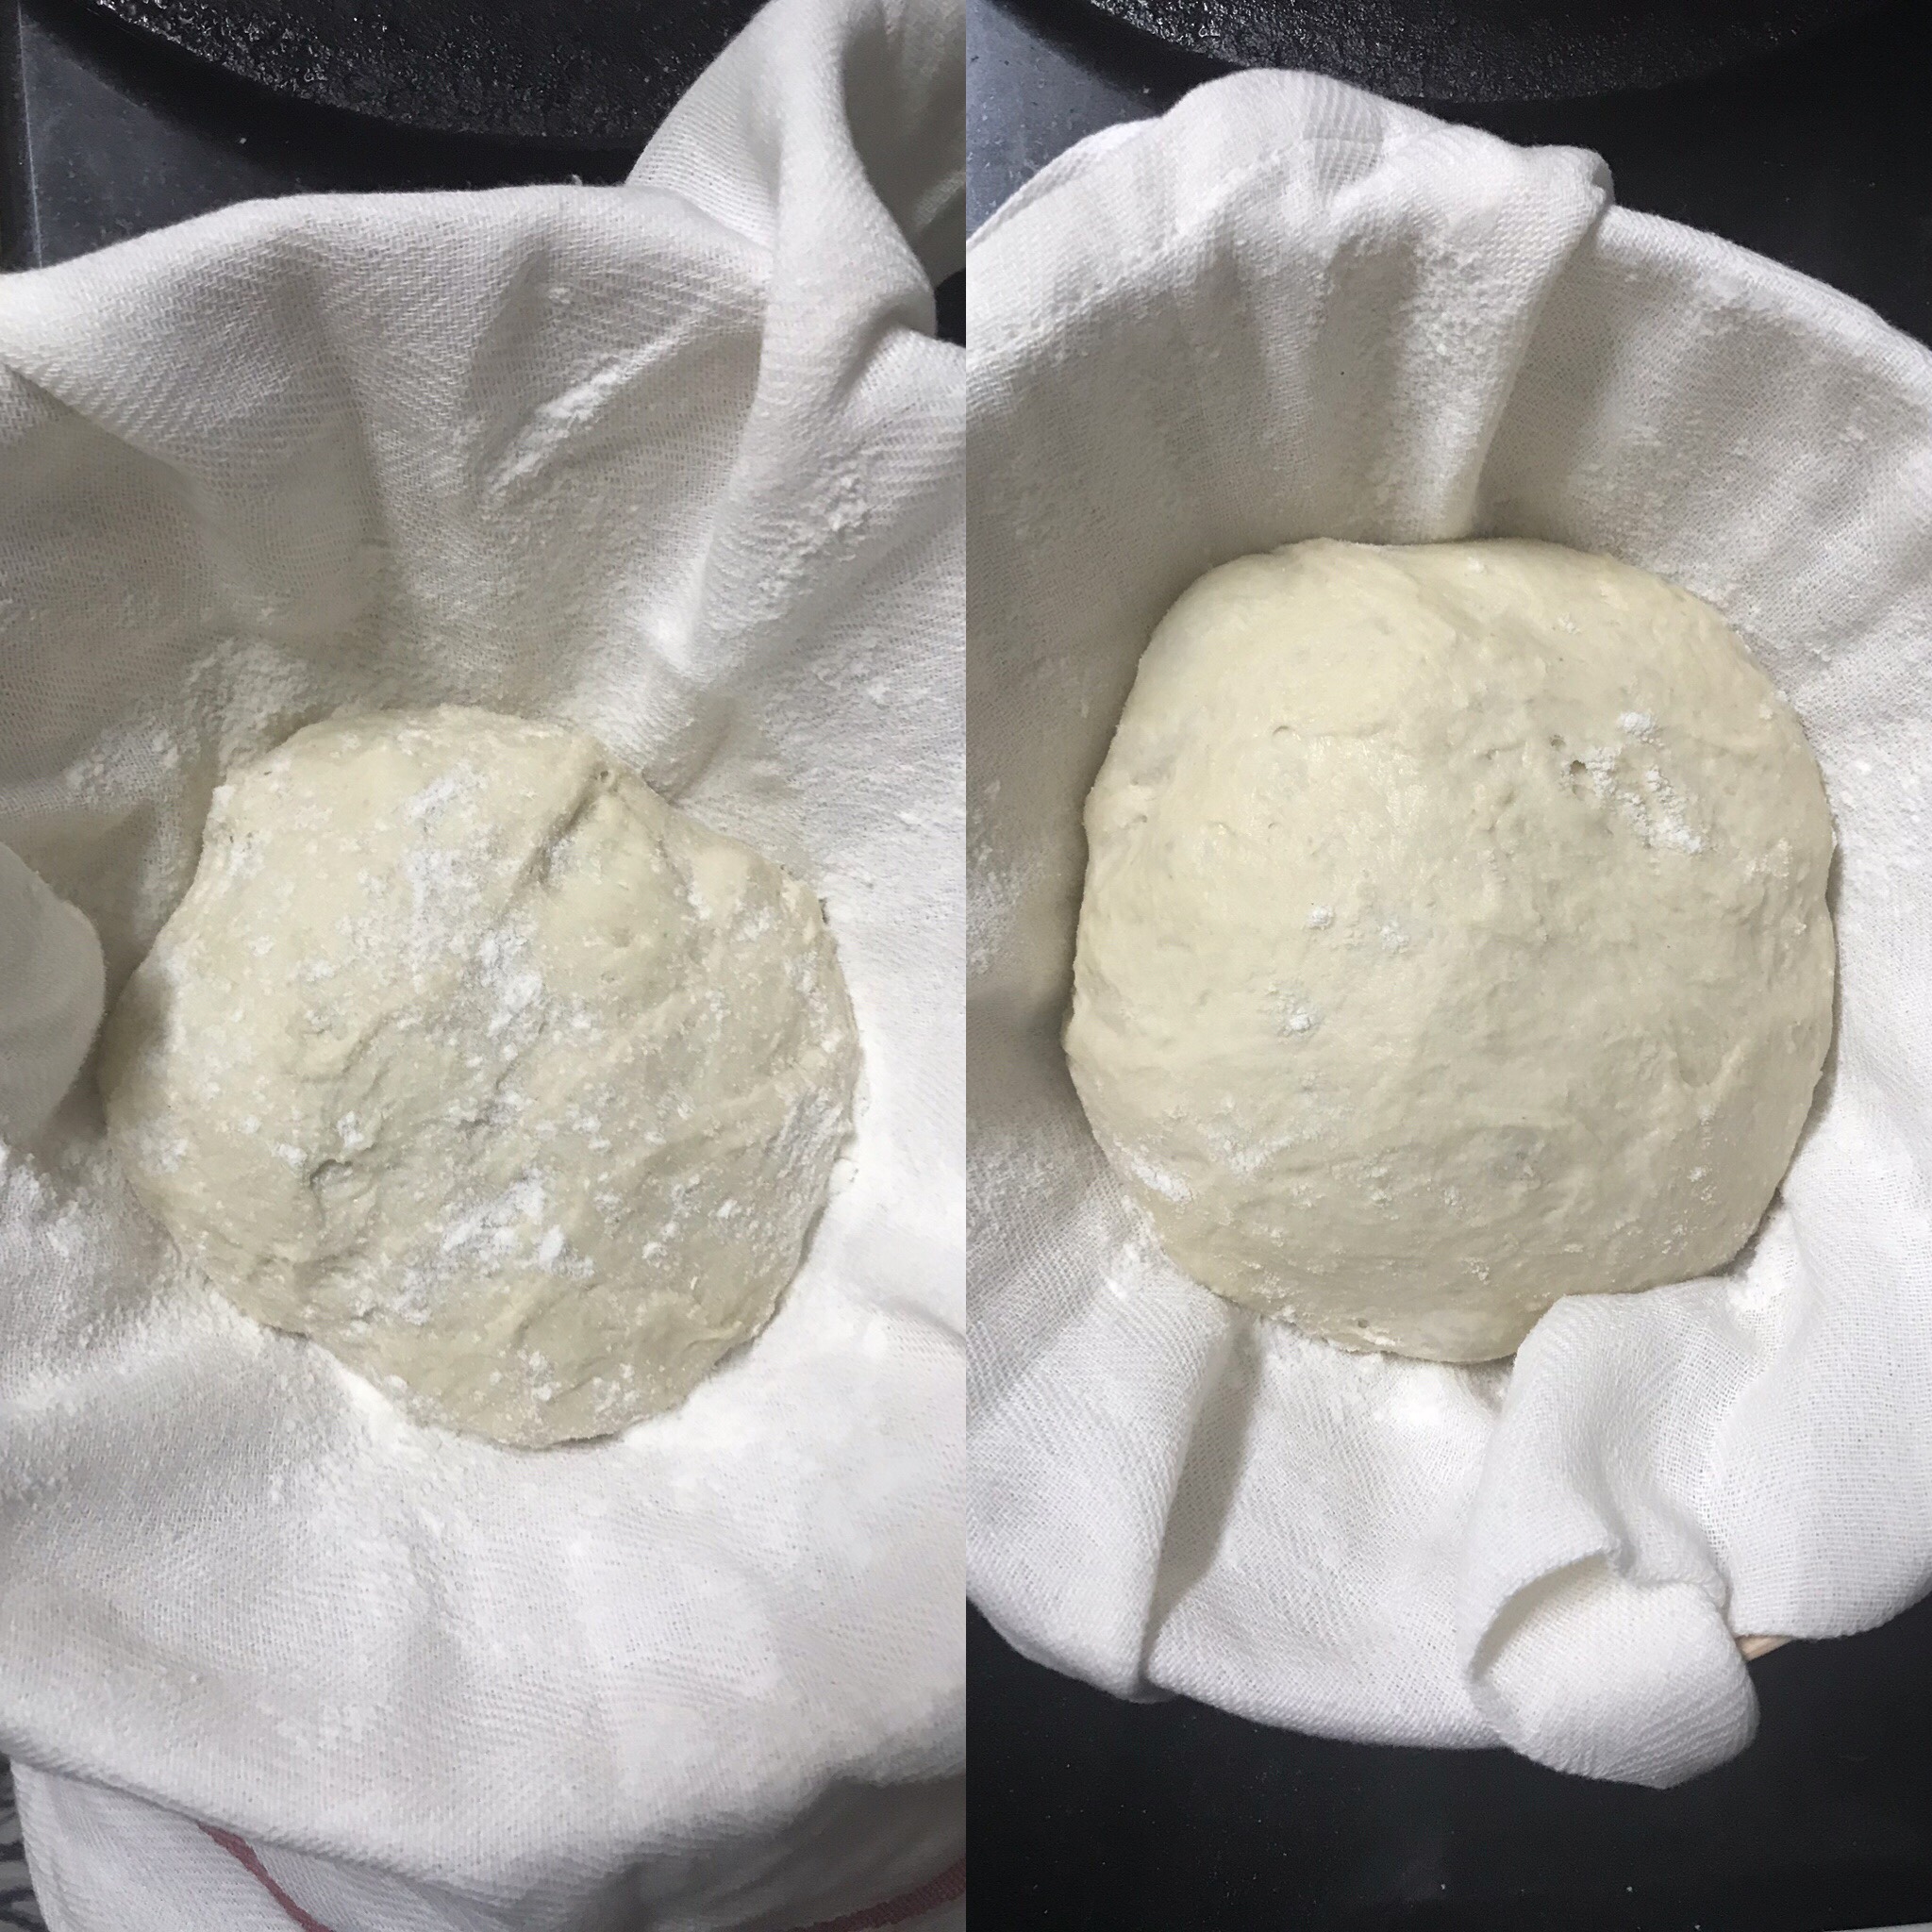 Dough proofed 10 hours in the refrigerator and shows visible expansion